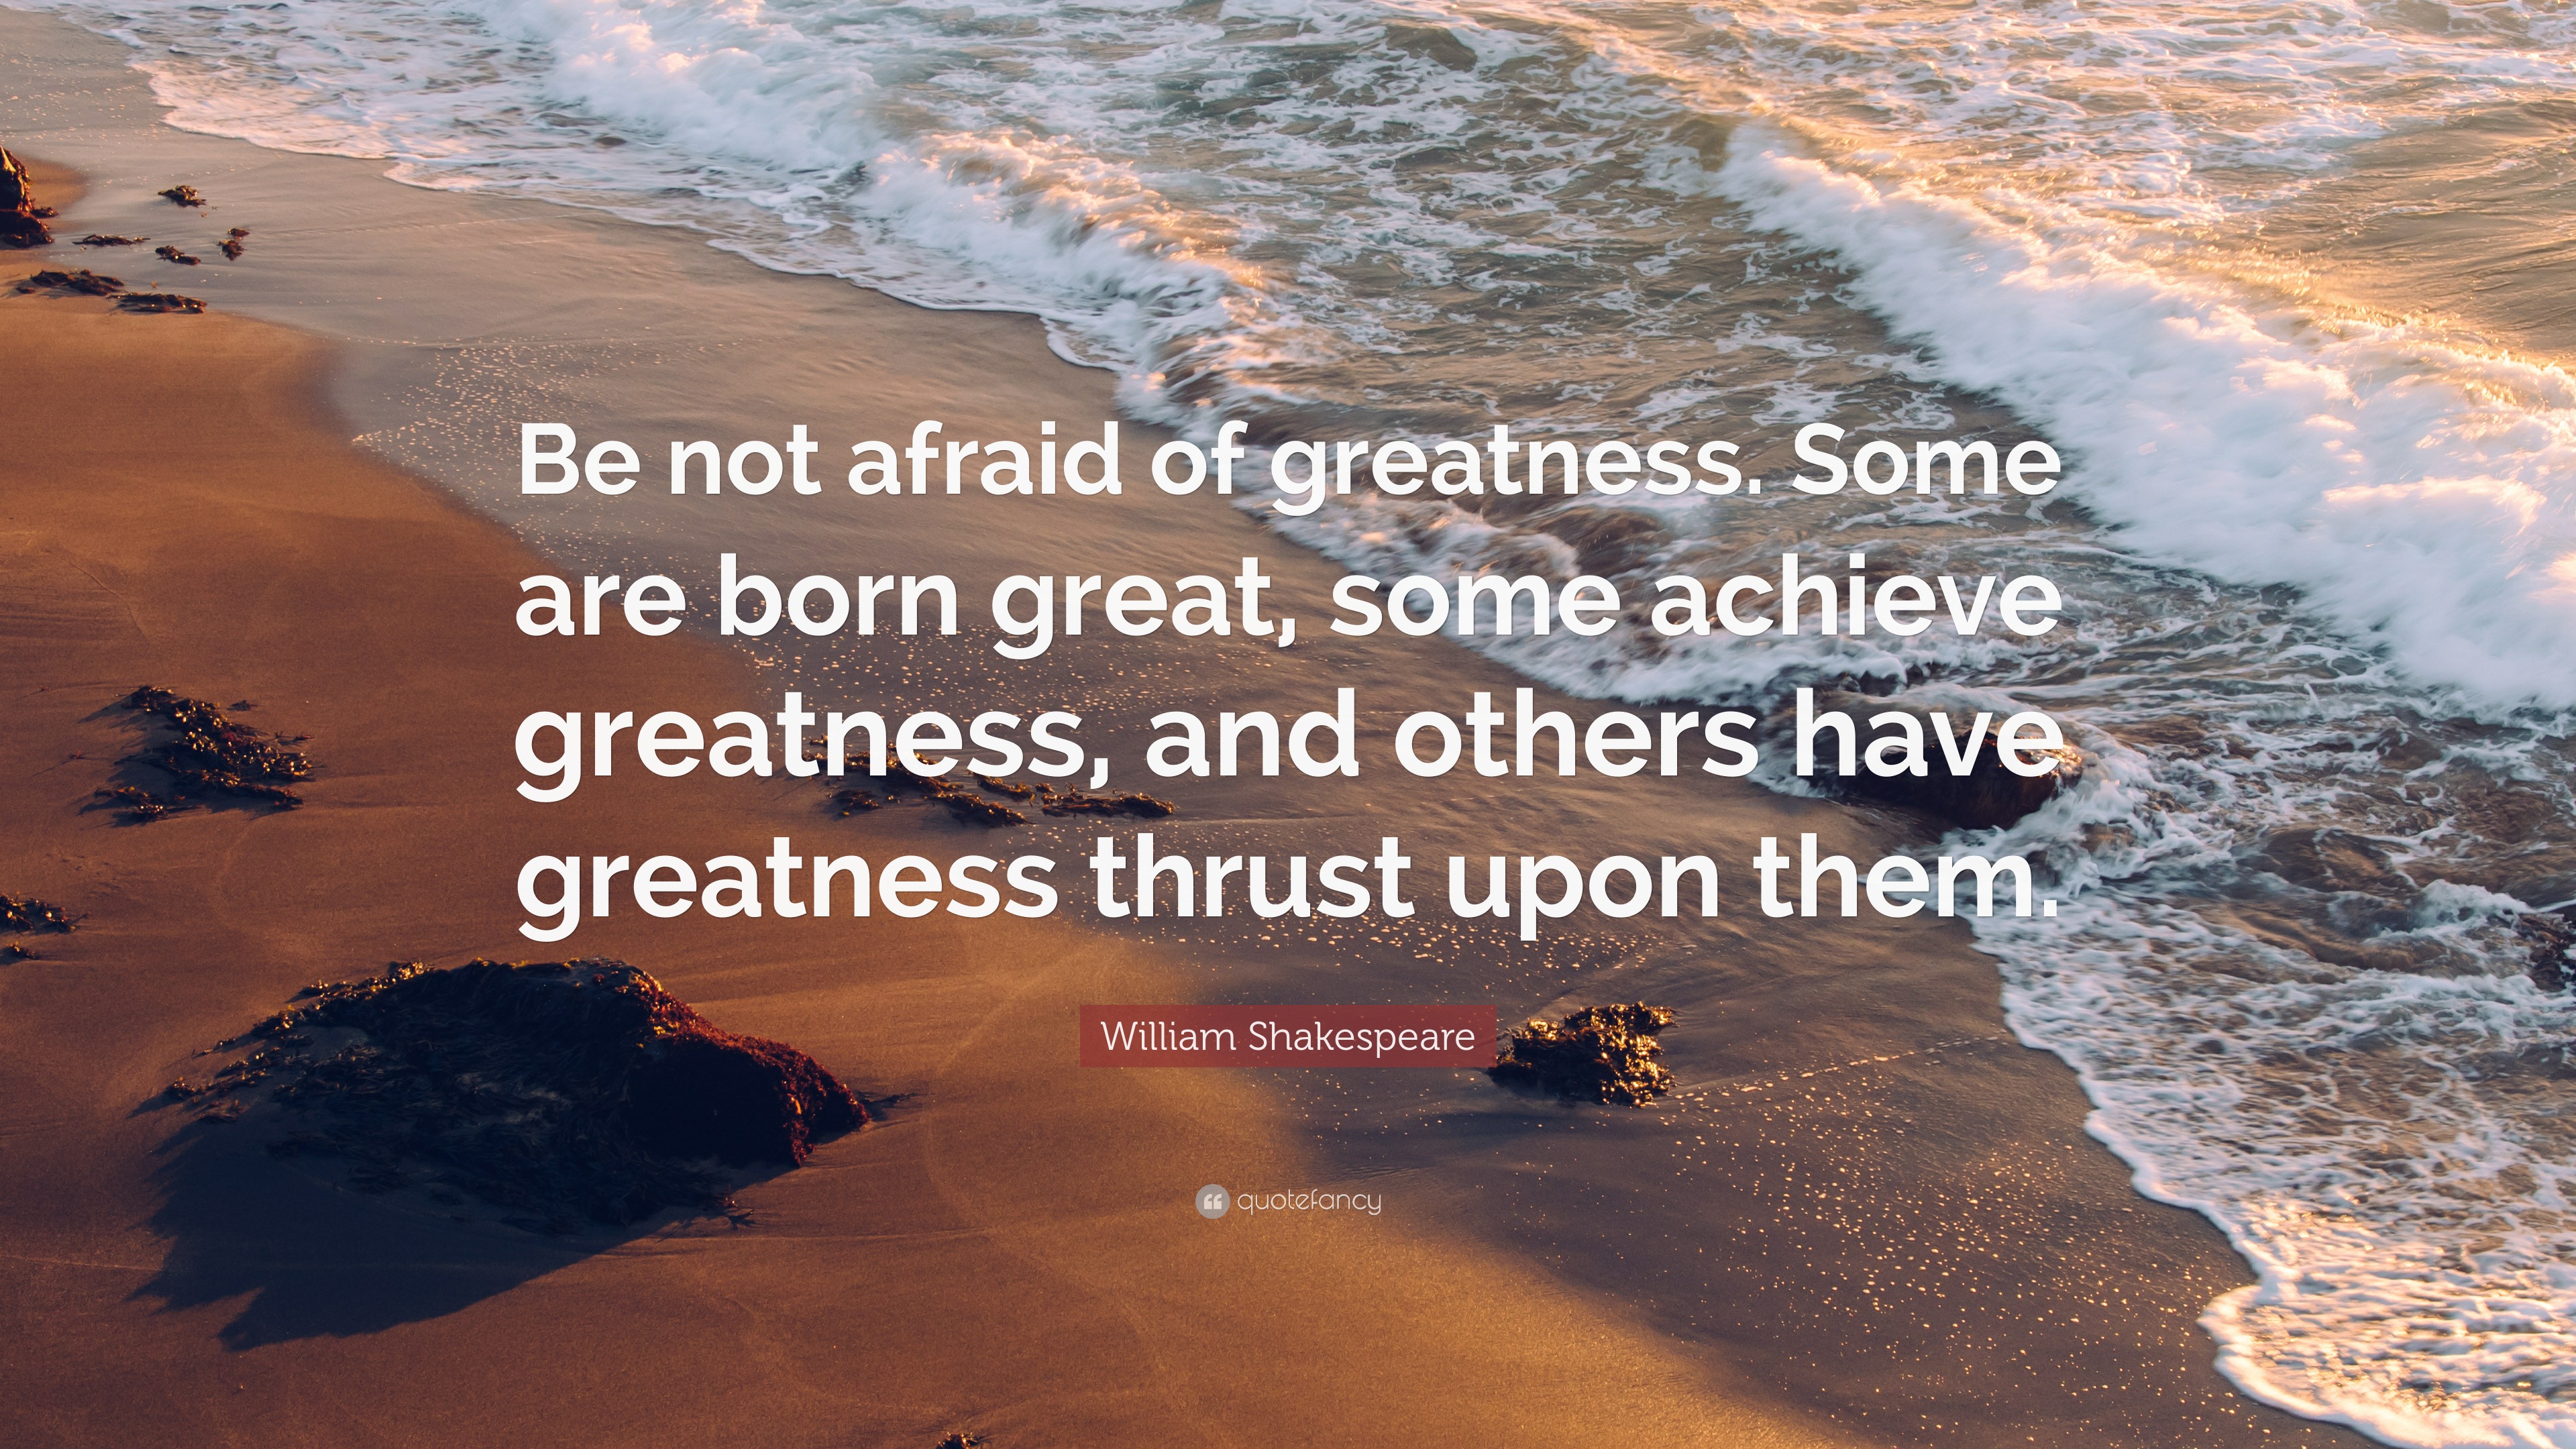 William Shakespeare Quote “Be not afraid of greatness